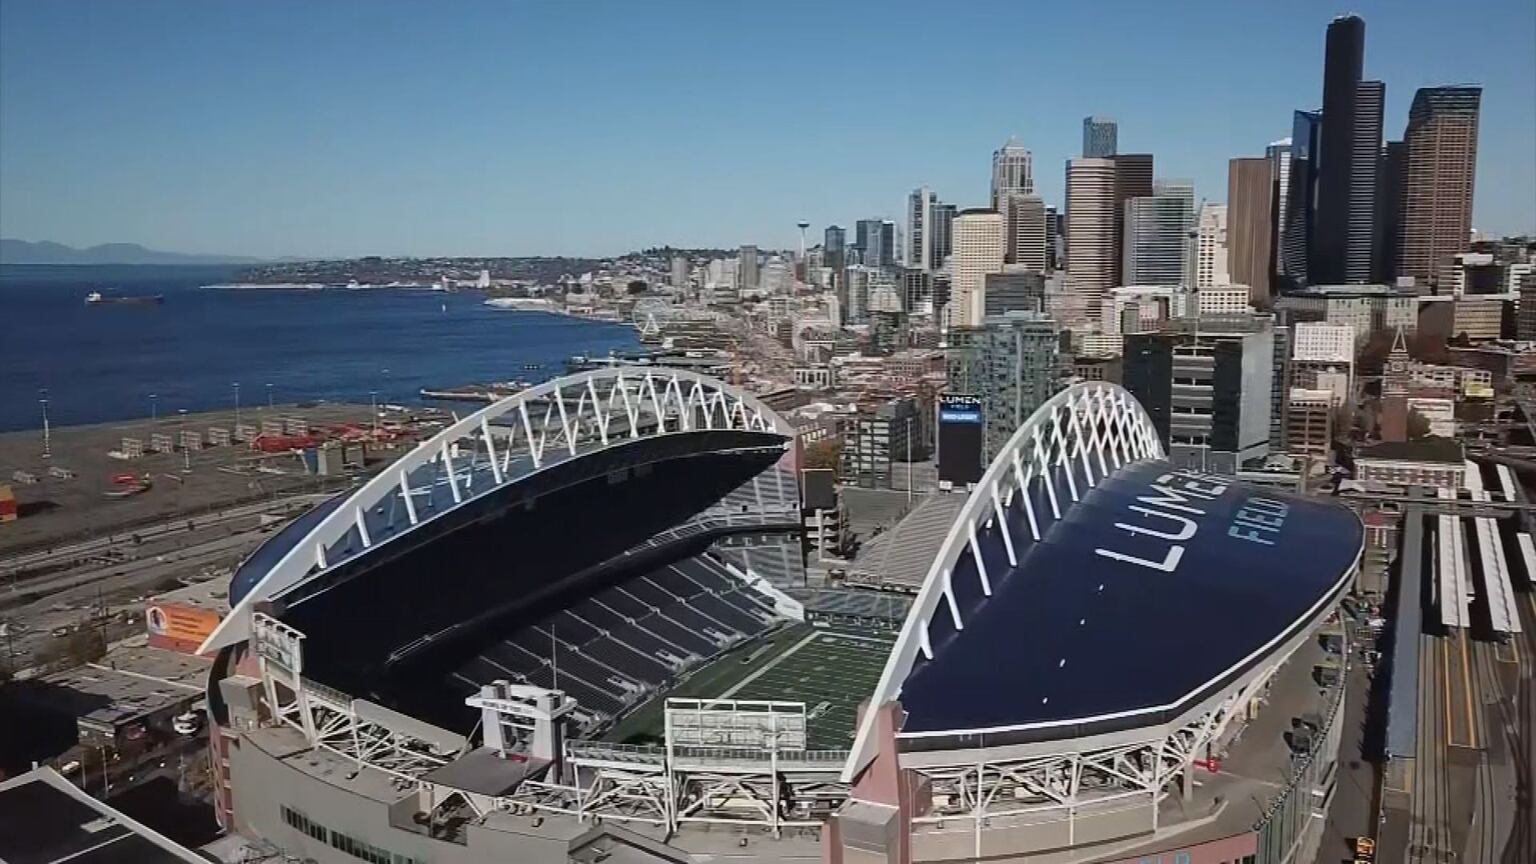 Seattle World Cup 2026 aims to support marginalized communities